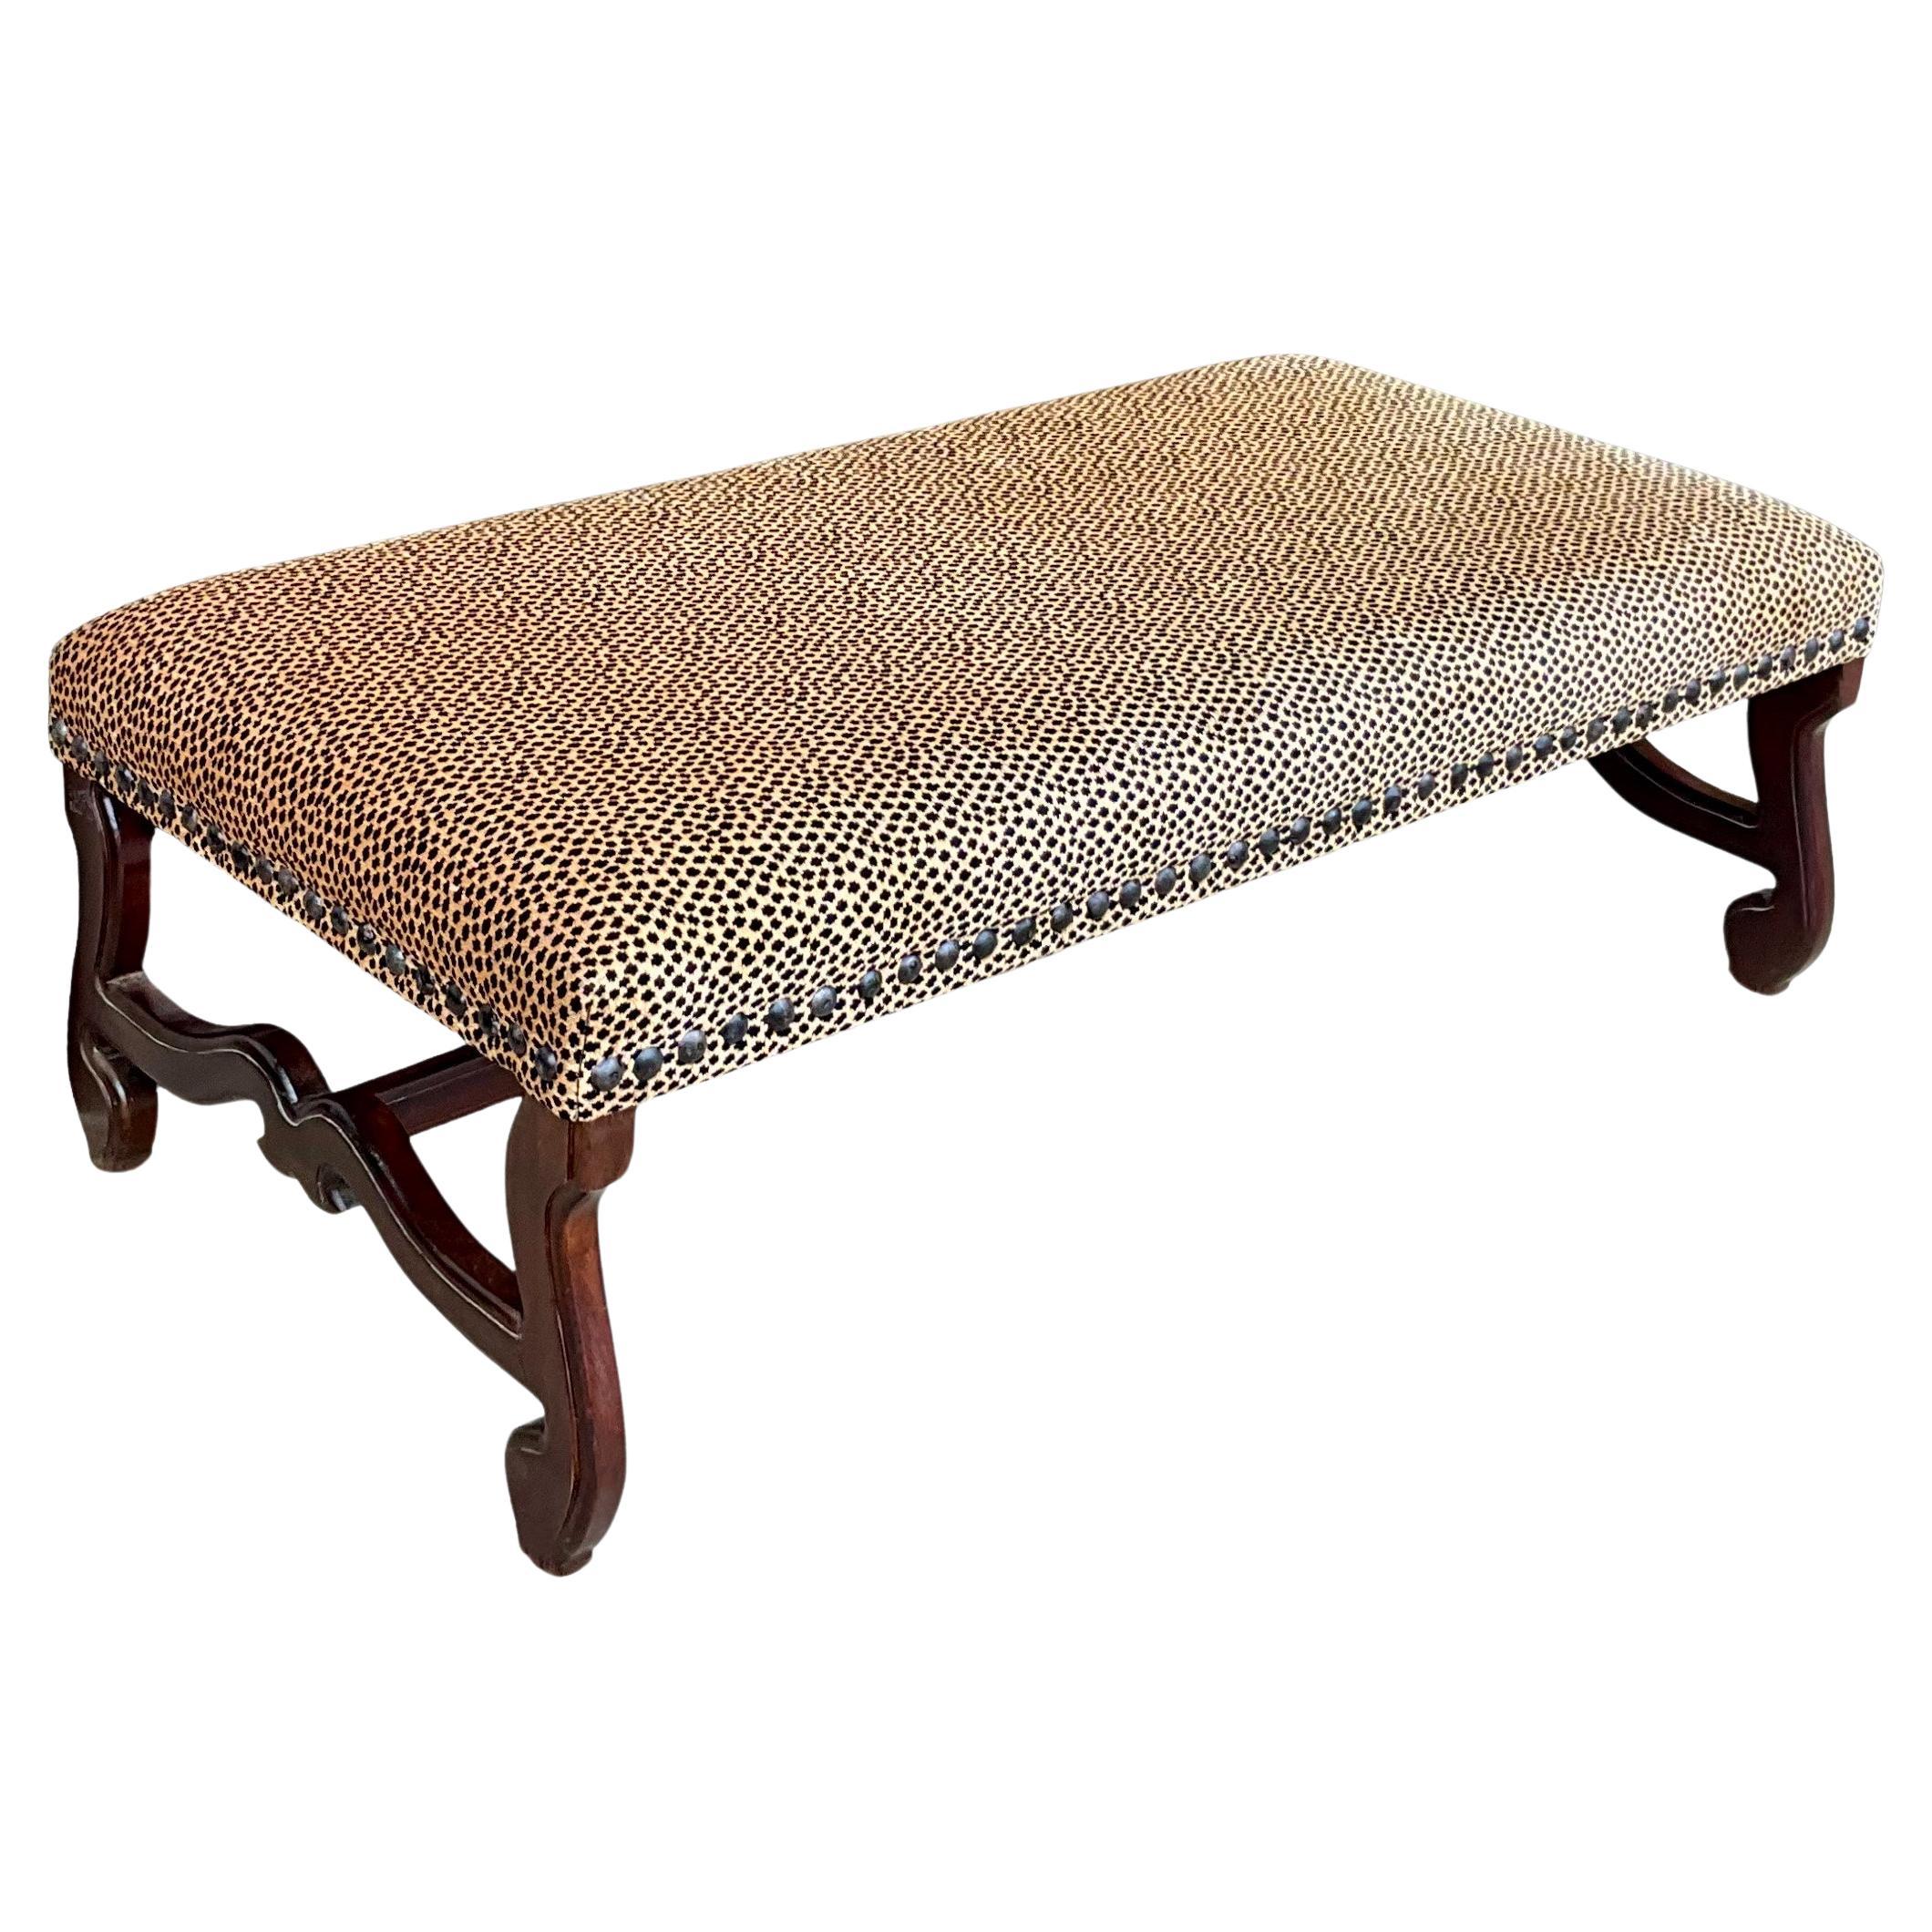 French Style Carved Oak Ottoman W/ Nailheads In Leopard Upholstery For Sale